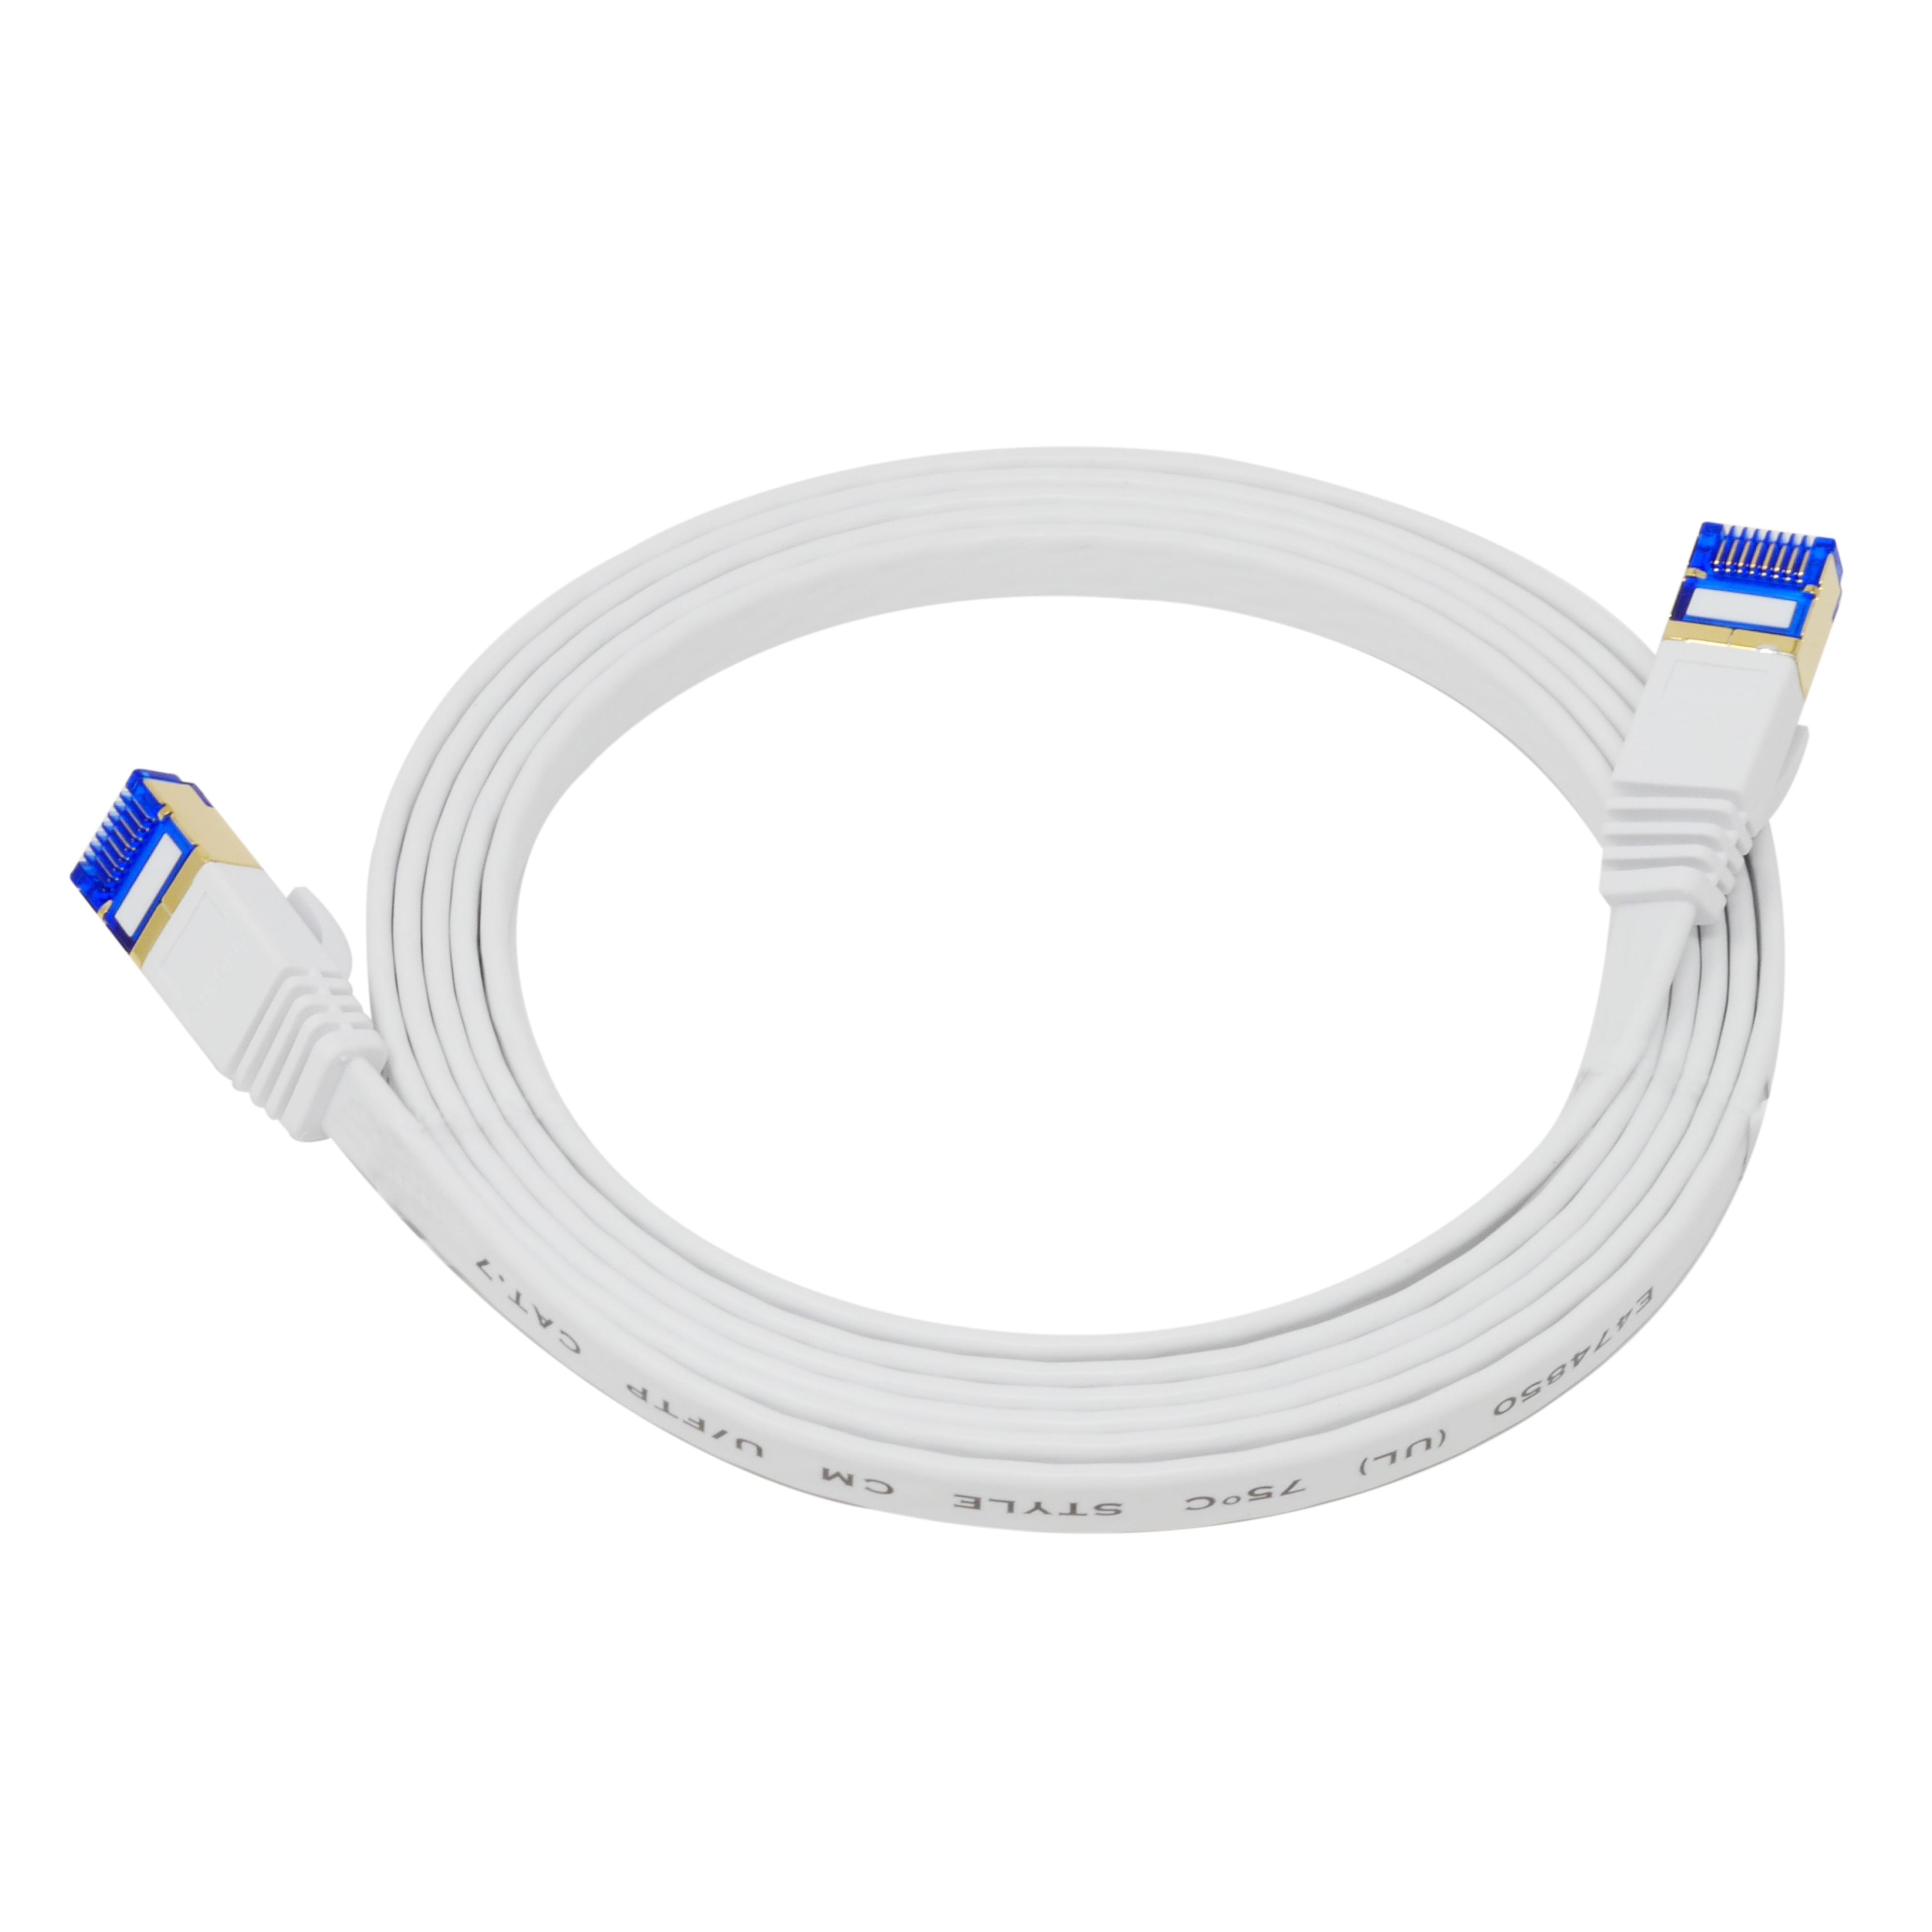 QualGear QG-CAT7F-6FT-WHT CAT 7 S/FTP Ethernet Cable Length 6 feet - 26 AWG, 10 Gbps, Gold Plated Contacts, RJ45, 99.99% OFC Copper, Color White 